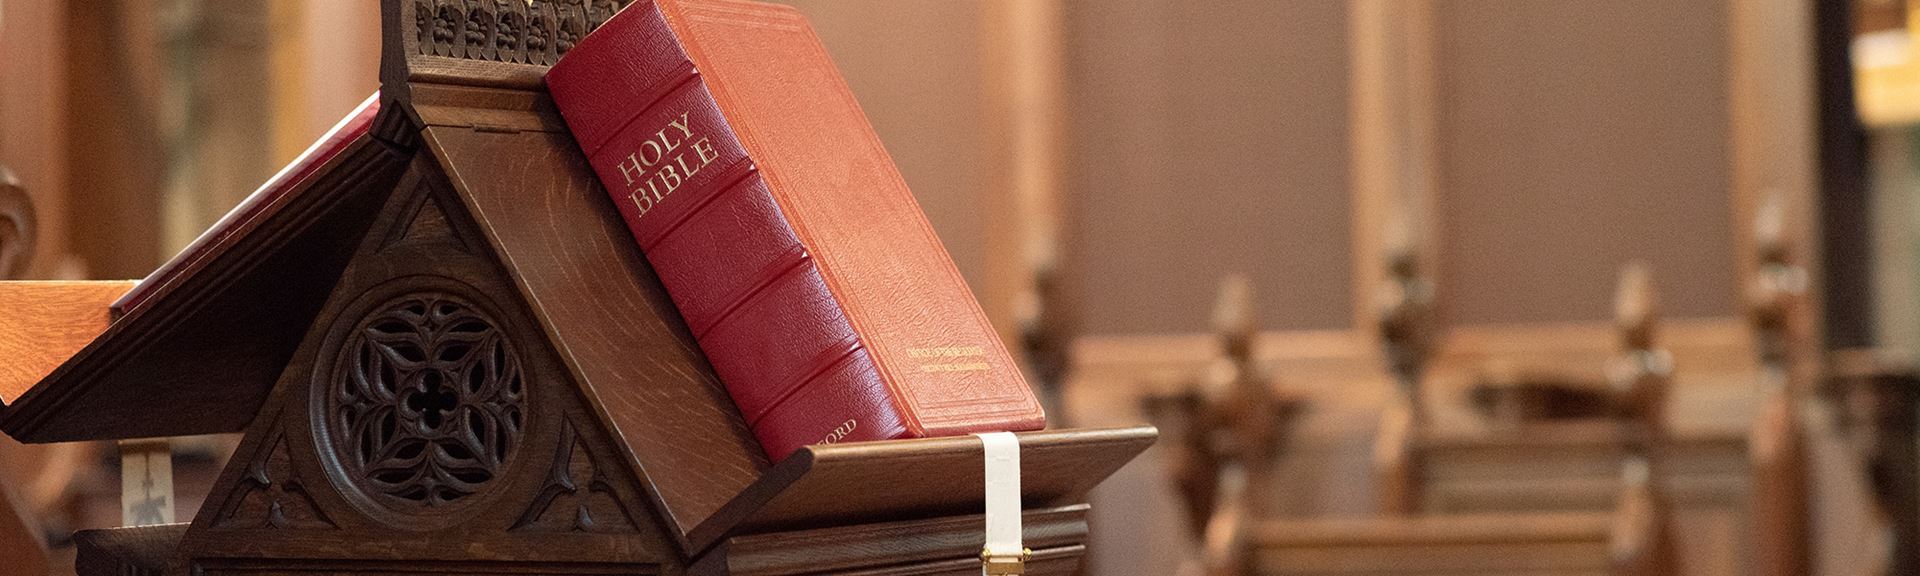 Bible on stand 